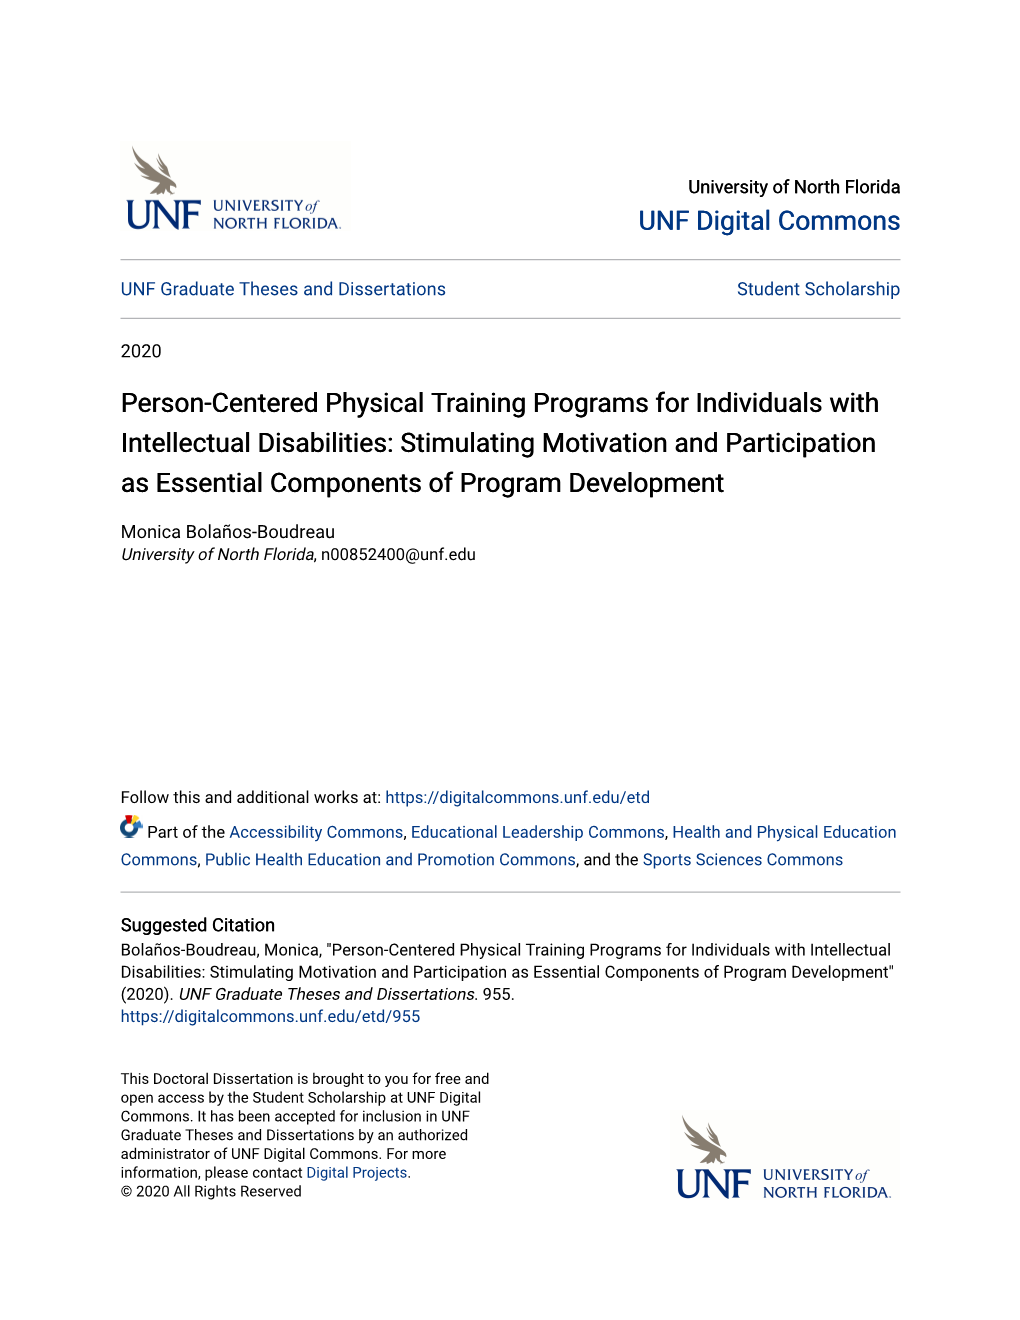 Person-Centered Physical Training Programs for Individuals with Intellectual Disabilities